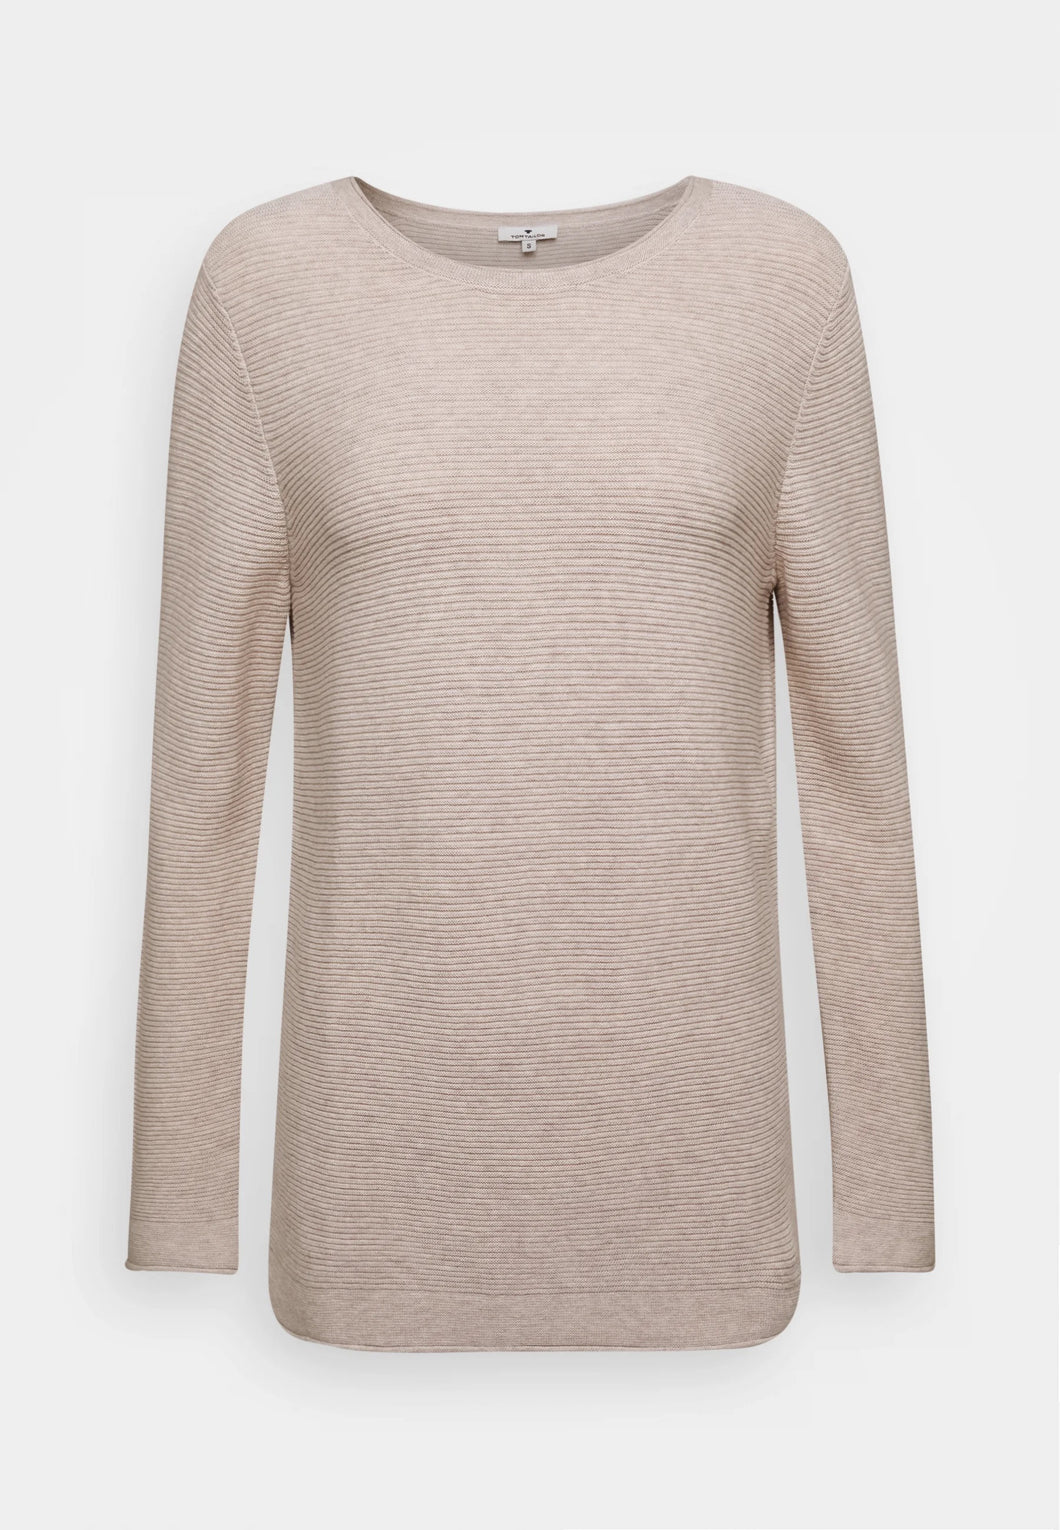 Tom Tailor Dusty Alabaster Round Neck Ribbed Sweater with Dark Trim